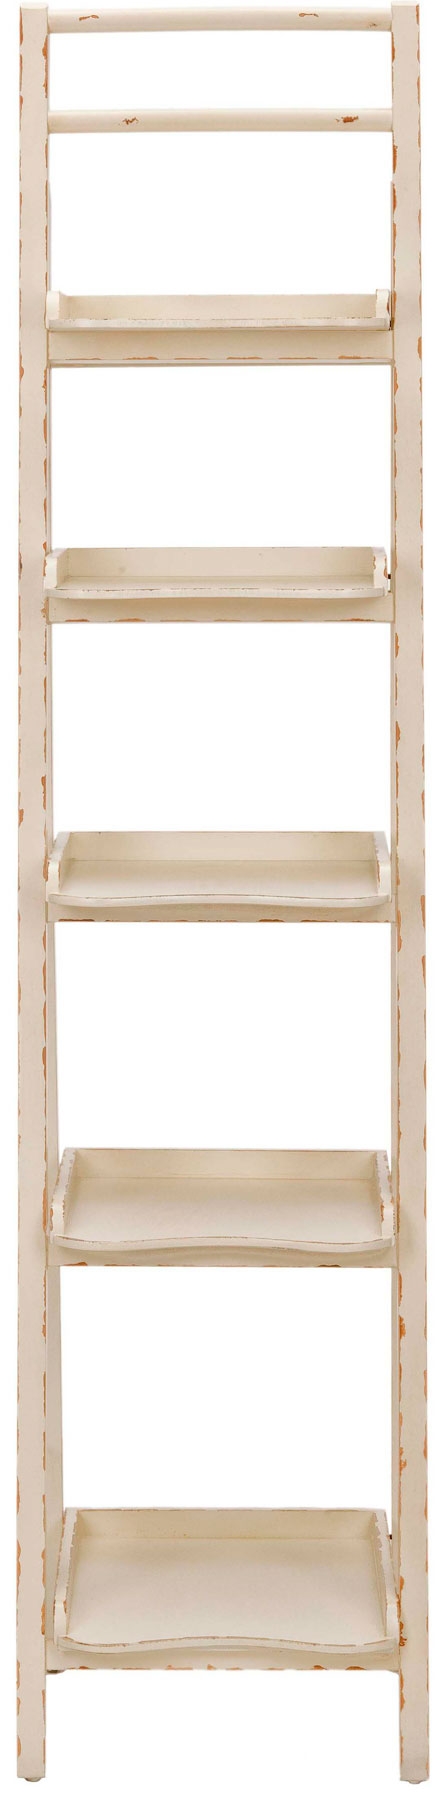 Asher Leaning 5 Tier Etagere - Vintage Cream - Arlo Home - Image 0